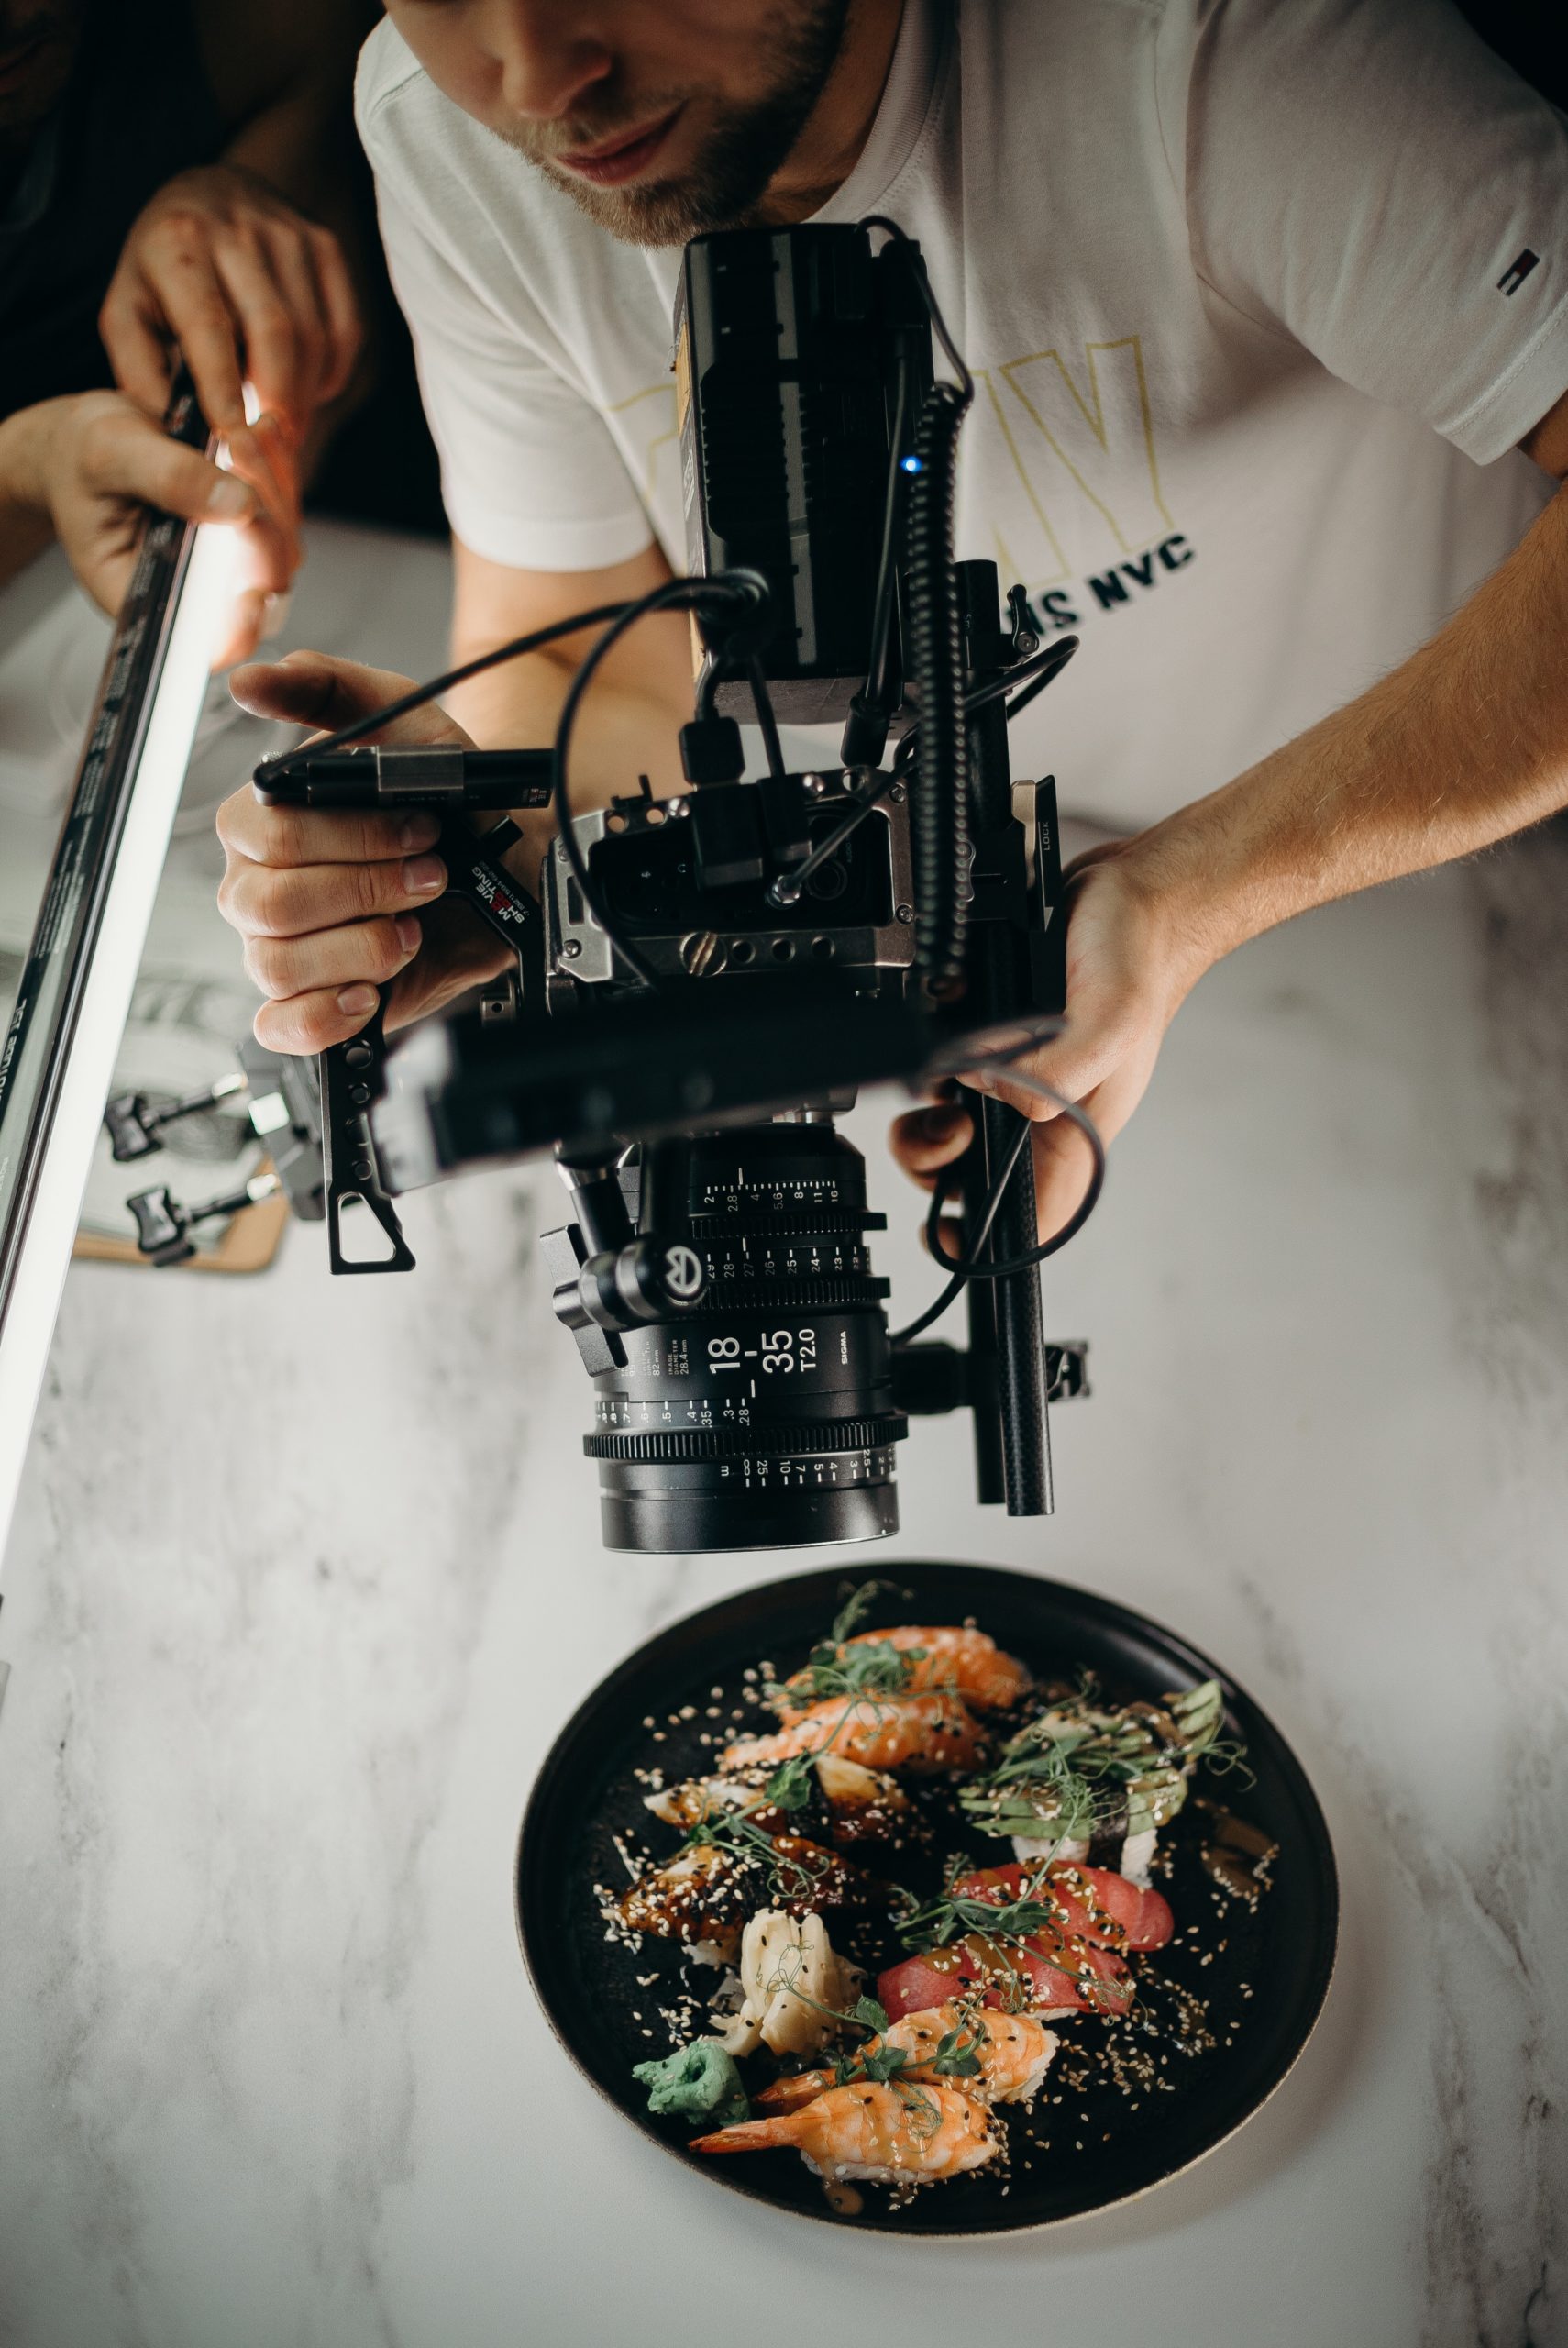 man-using-video-camera-pointing-on-food-on-plate-3298603